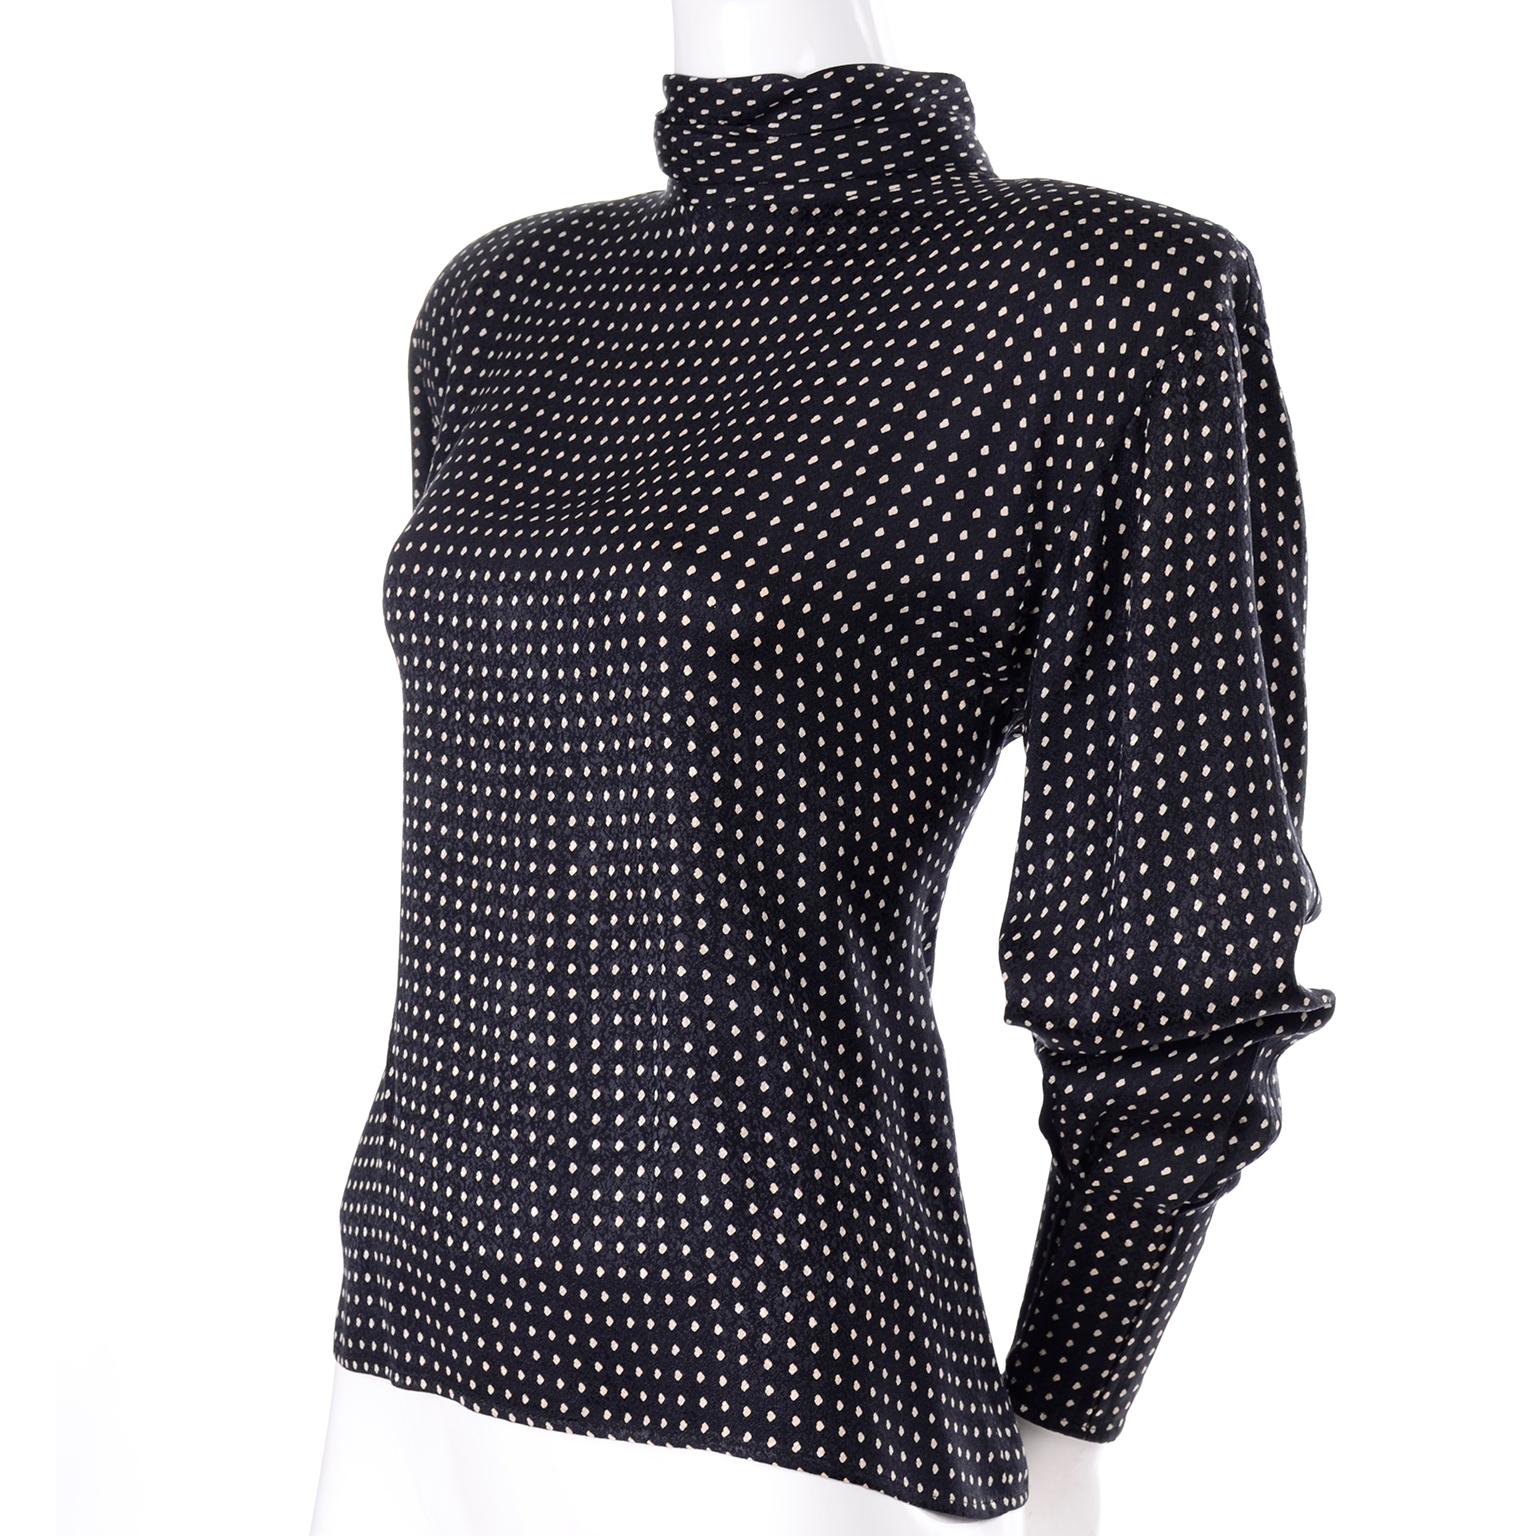 This is a lovely vintage early 1980's Ungaro Parallele Paris blouse in black silk with white polka dots and a gathered high neck. This top buttons up the back with black faceted buttons.  It has dramatic shoulder pads for structure and unique leg of